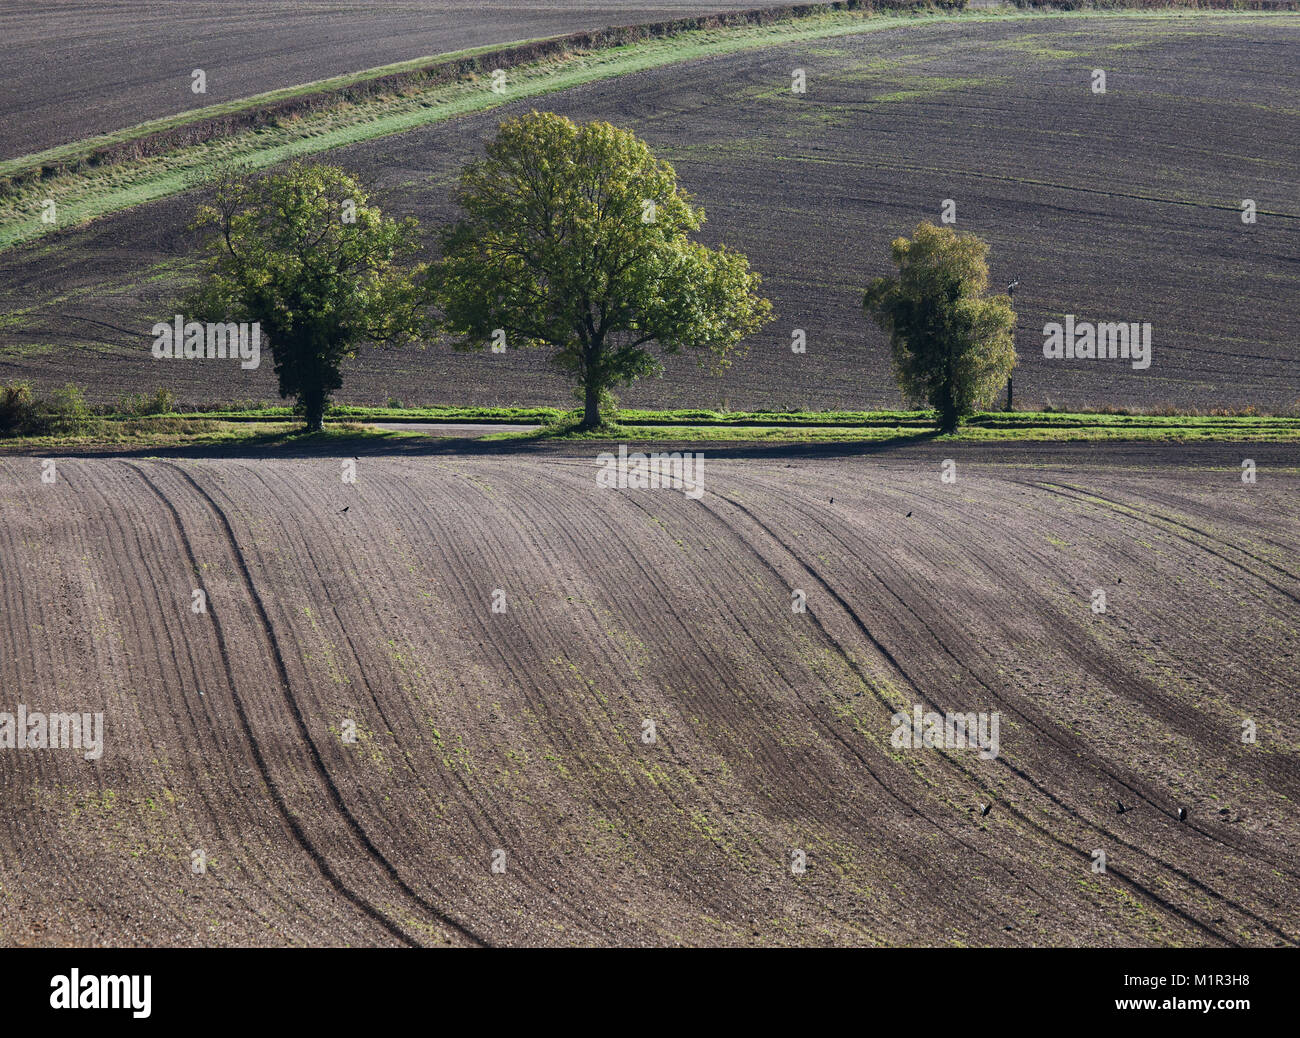 Undulating patterns created by ploughed field with trees, Buckinghamshire, England Stock Photo